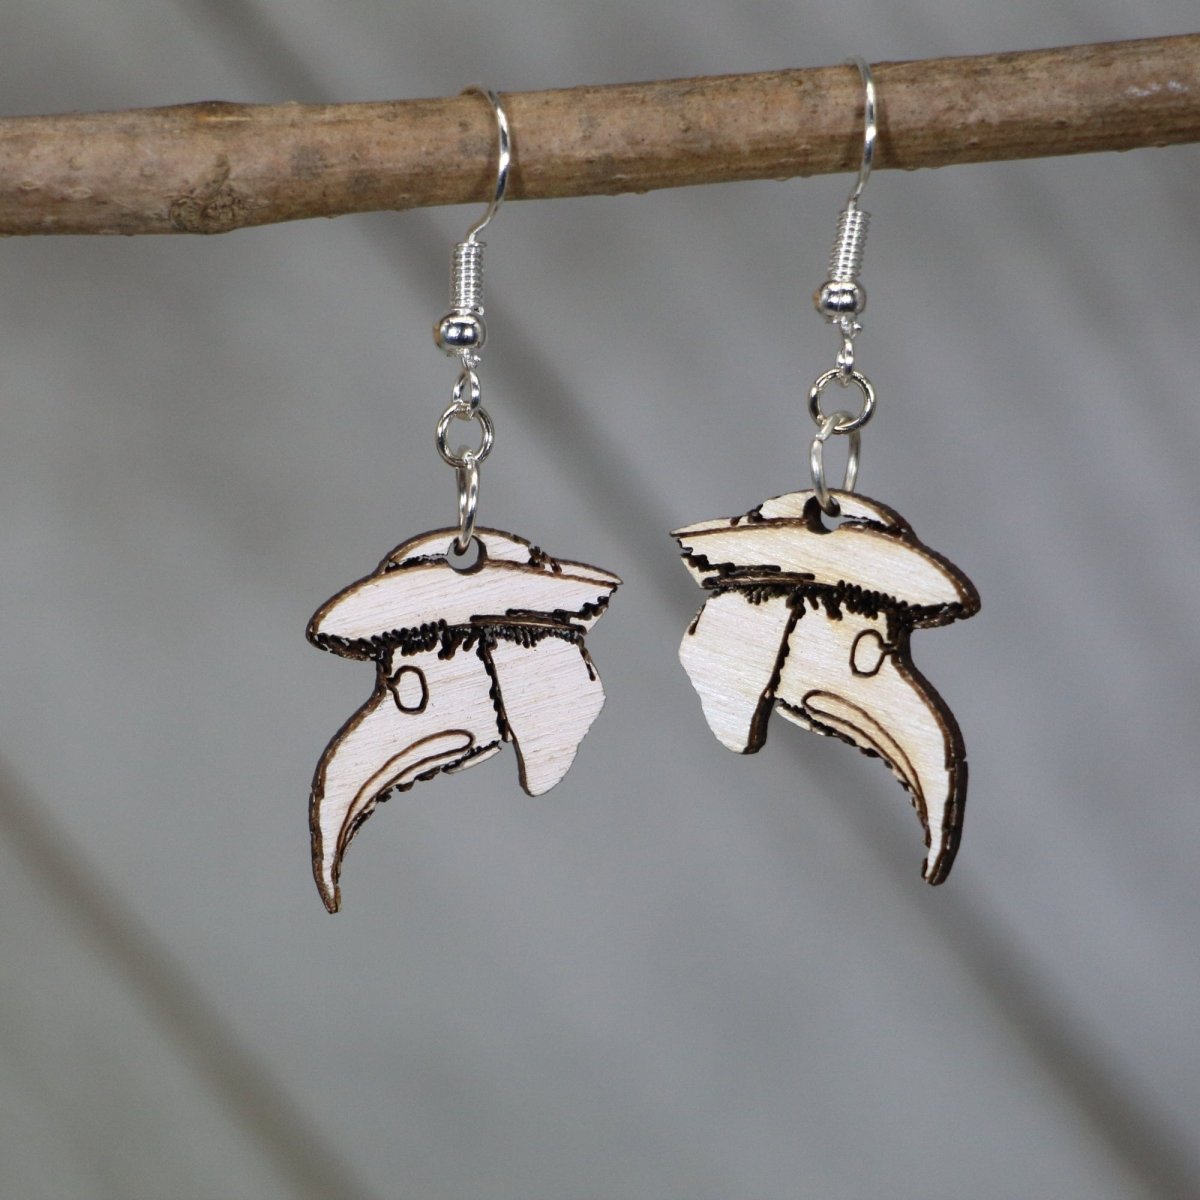 Plague Mask Wooden Dangle Earrings - - Cate's Concepts, LLC